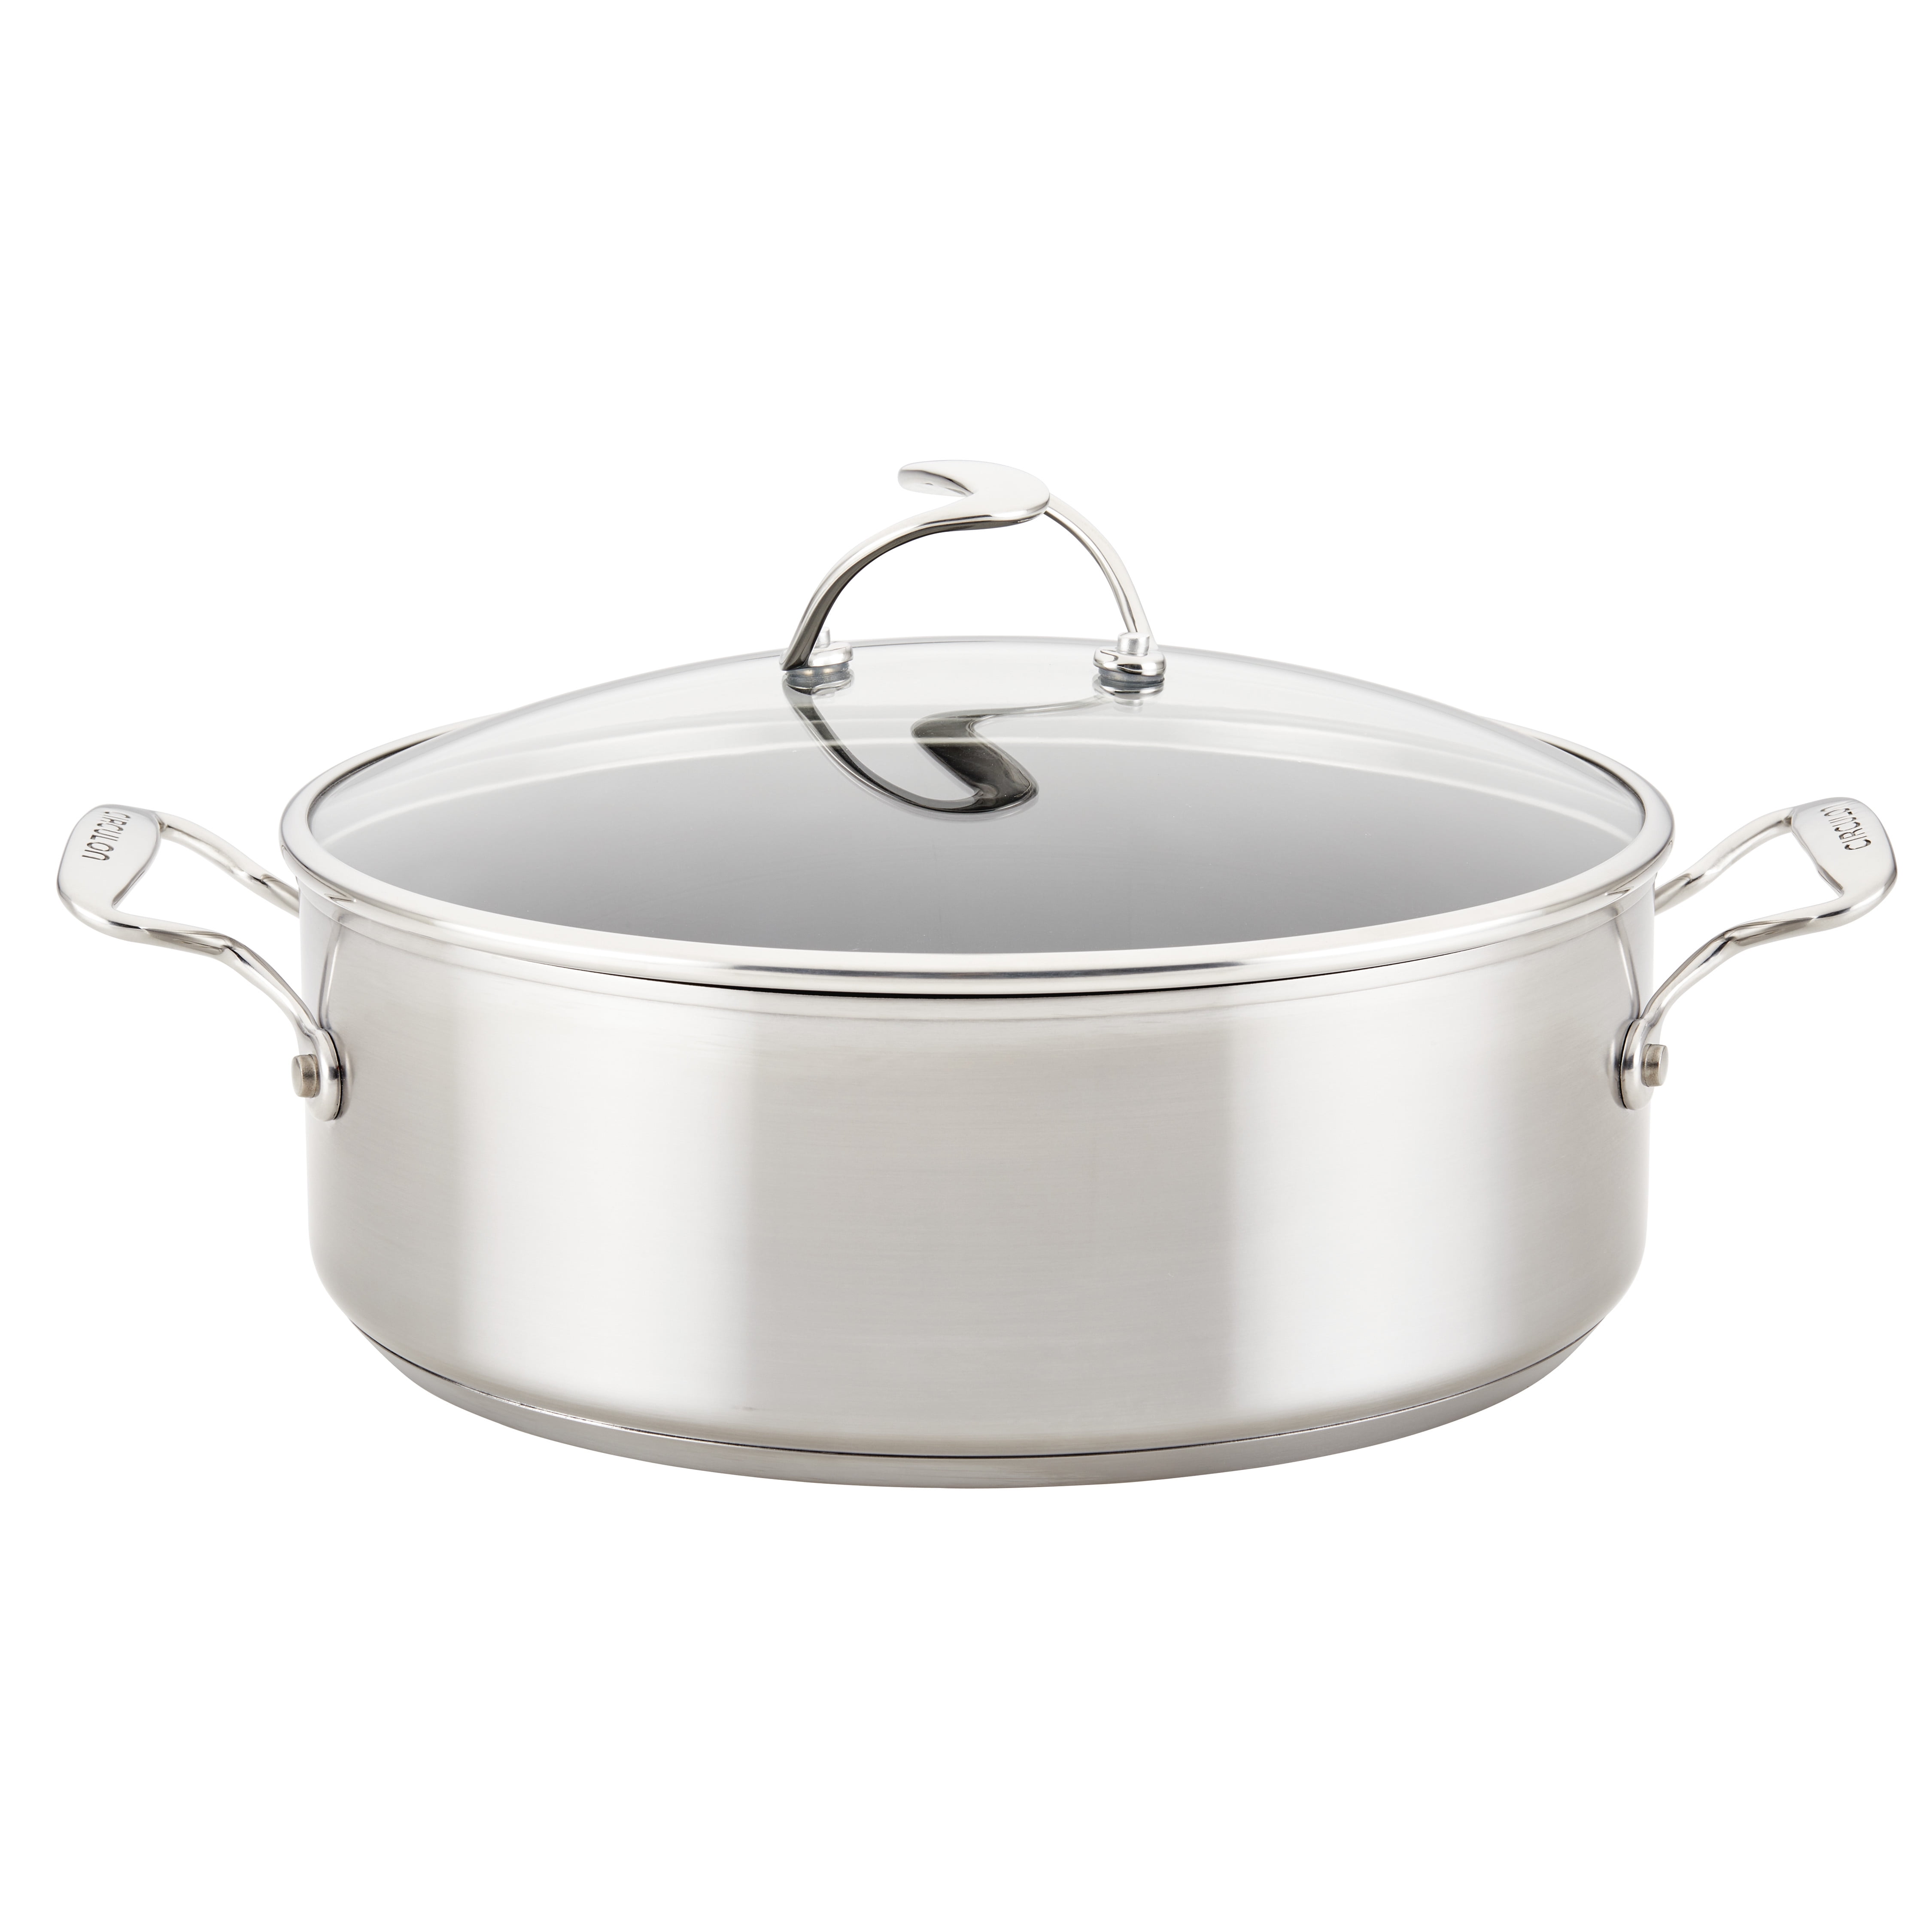  Cooks Standard 18/10 Stainless Steel Stockpot 8-Quart, Classic  Deep Cooking Pot Canning Cookware with Stainless Steel Lid, Silver: Home &  Kitchen